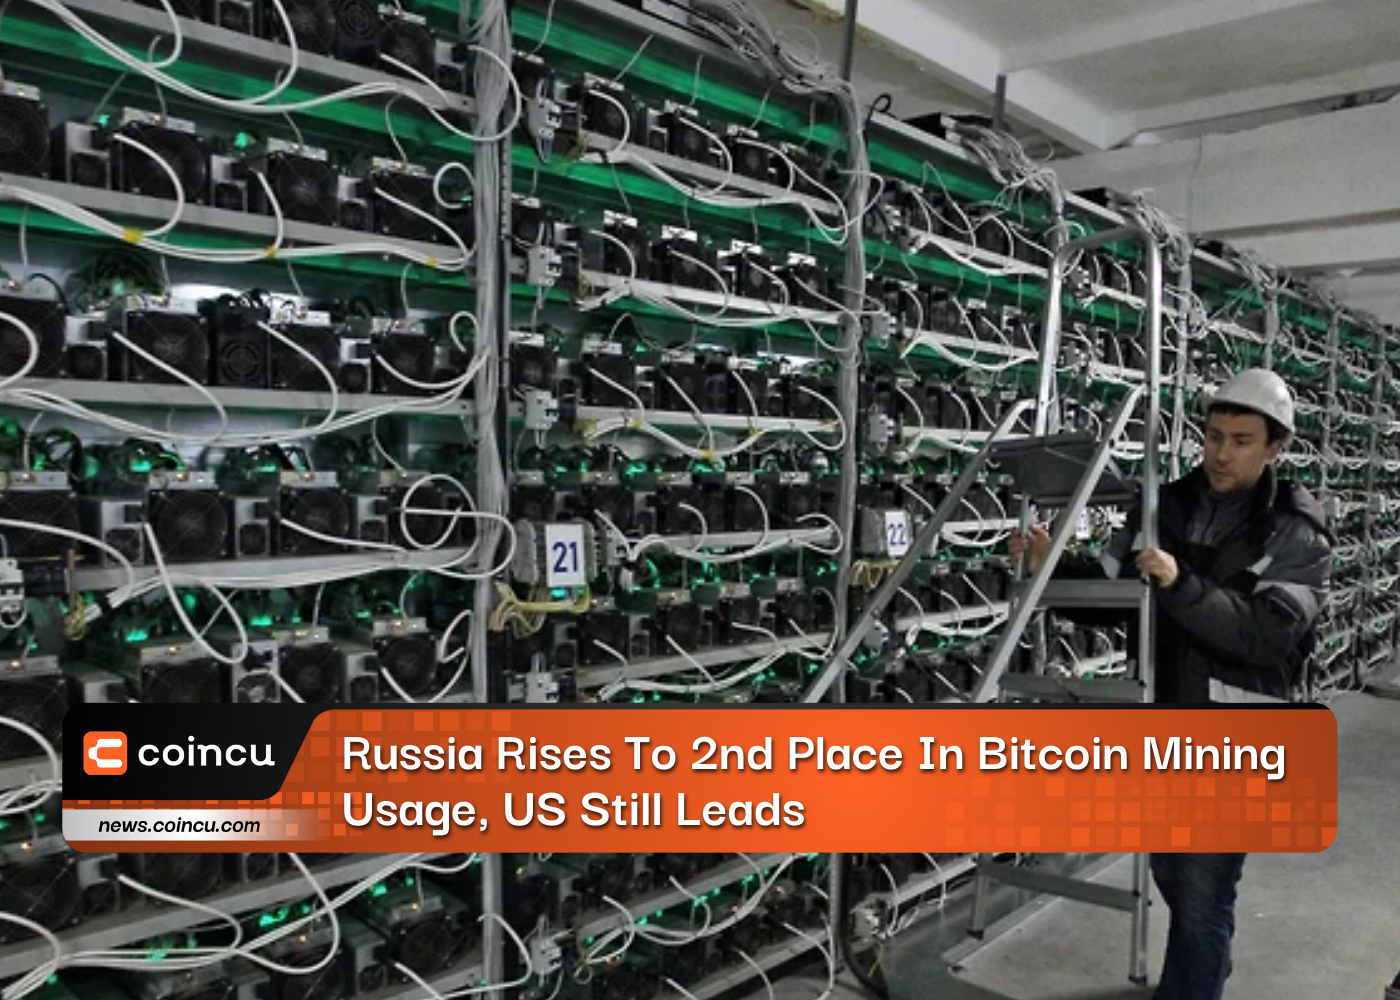 Russia Rises To 2nd Place In Bitcoin Mining Usage, US Still Leads